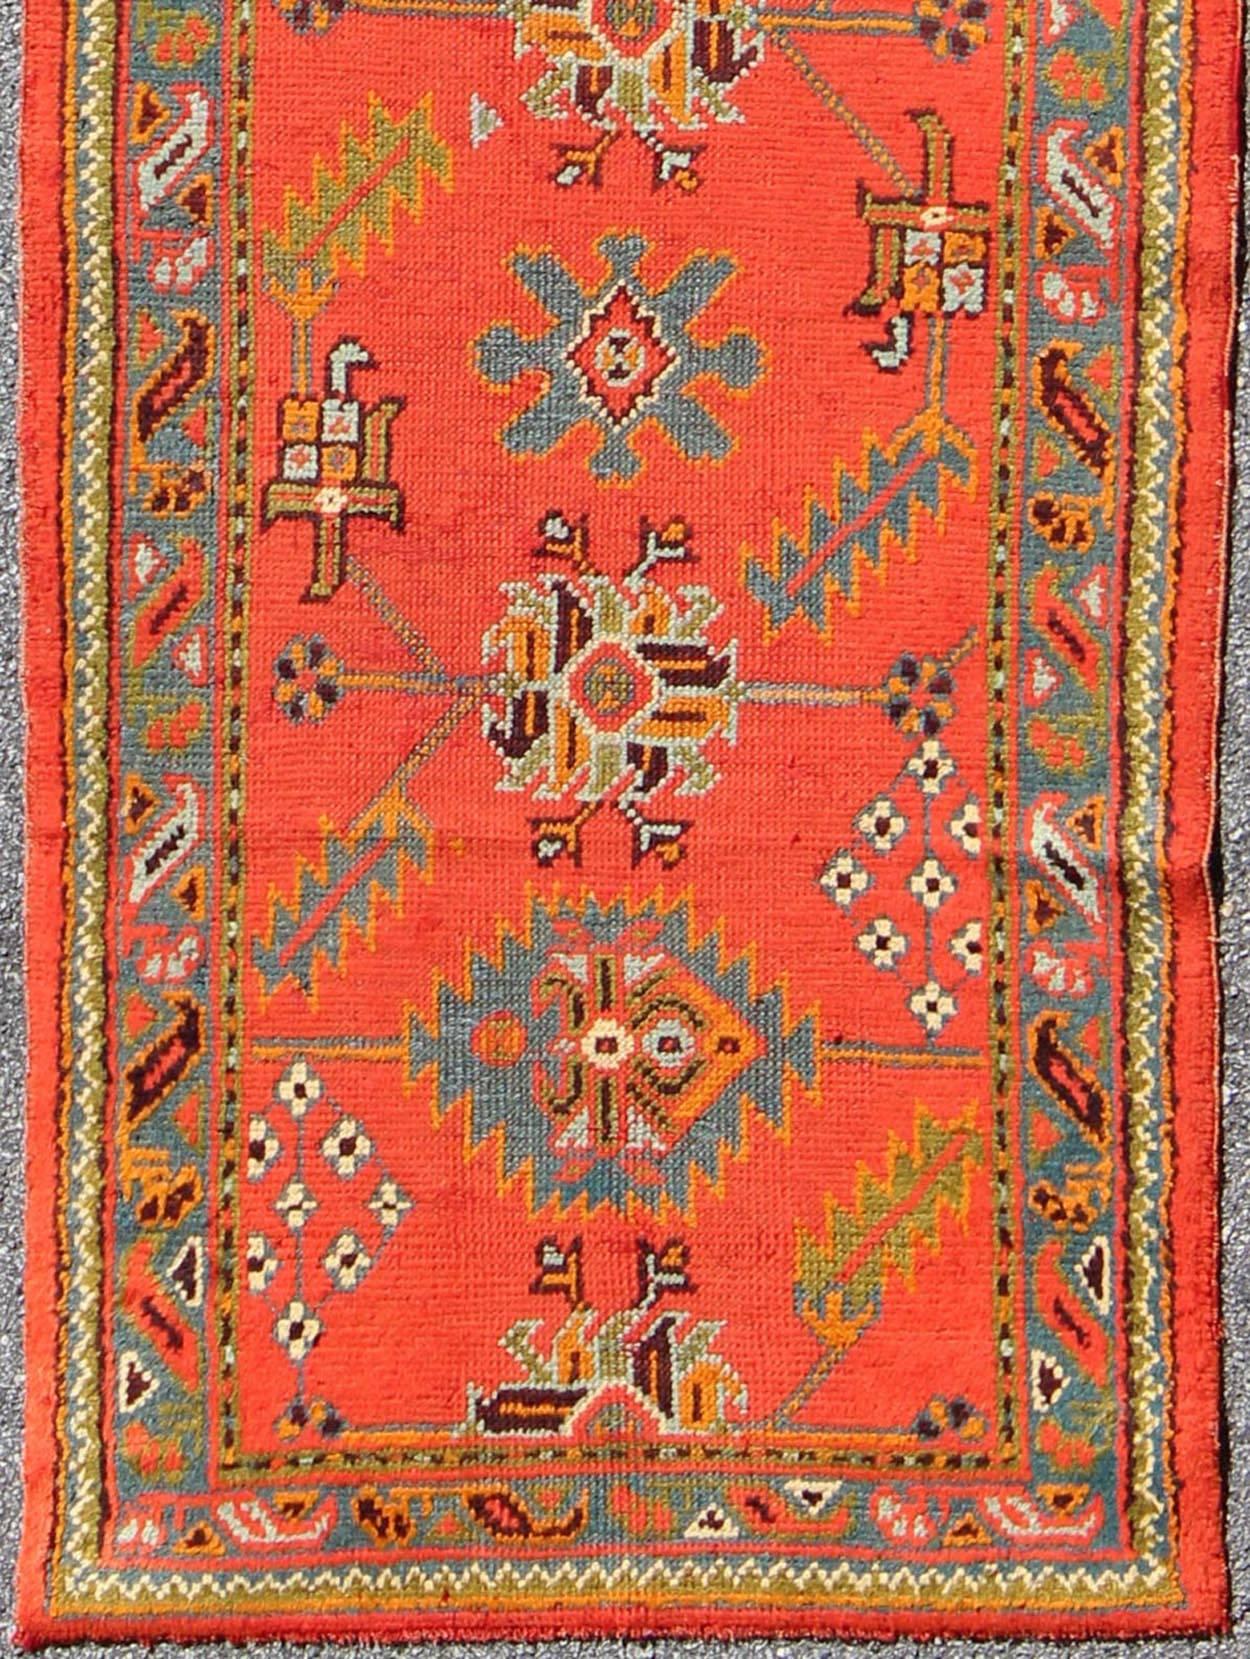 Bright red antique Turkish Oushak runner with Sub-geometric tribal motifs, rug l11-0304, country of origin / type: Turkey / Oushak, circa 1920

This antique Oushak runner features a unique blend of cheerful colors and an intricately beautiful